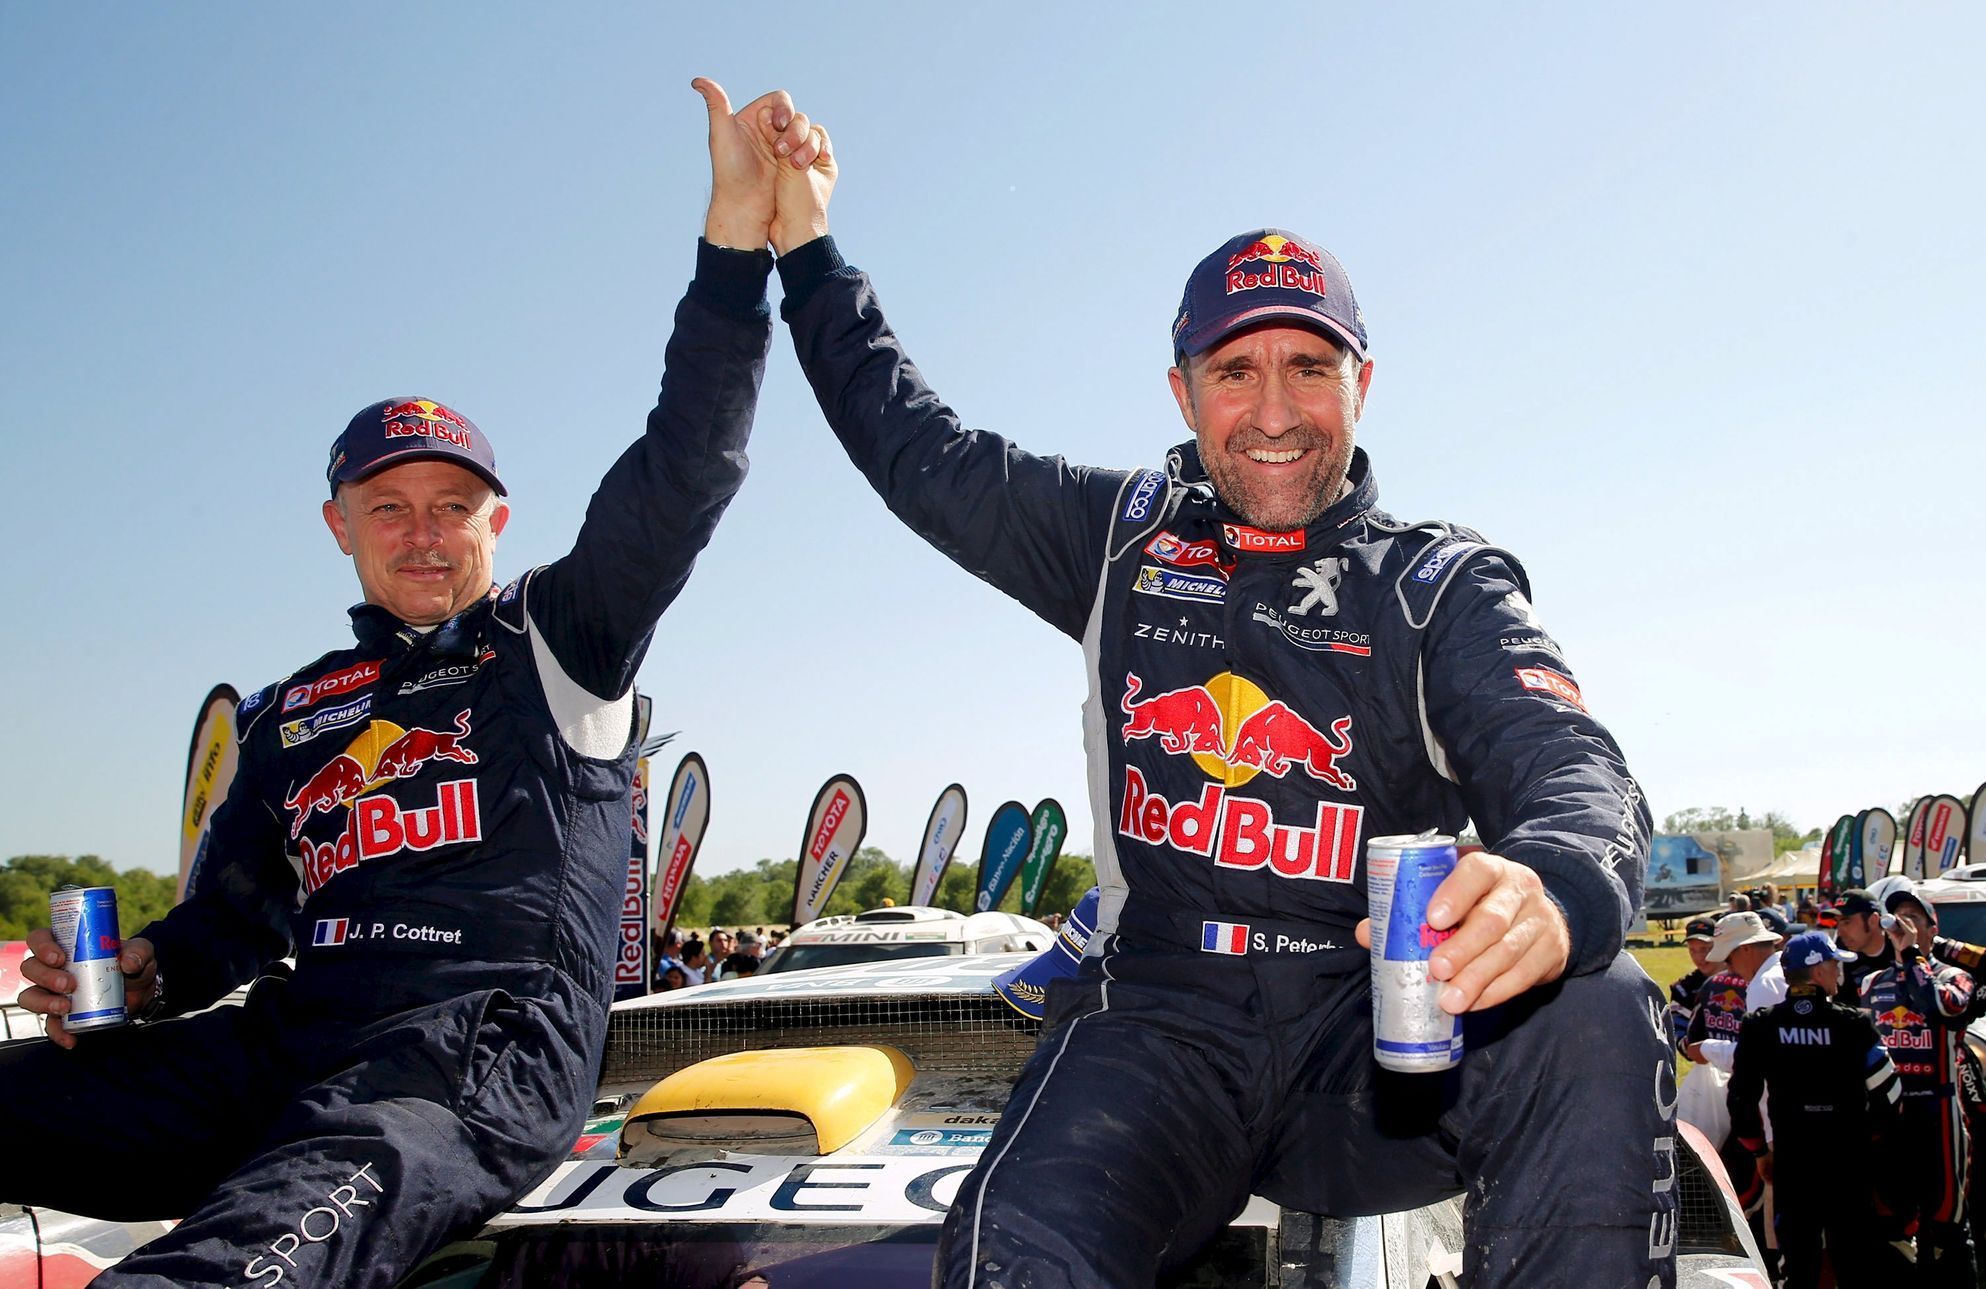 Peugeot driver Peterhansel of France and co-pilot Cottret of France react at the end of the 13th and final stage of the Dakar Rally 2016 in Cordoba province